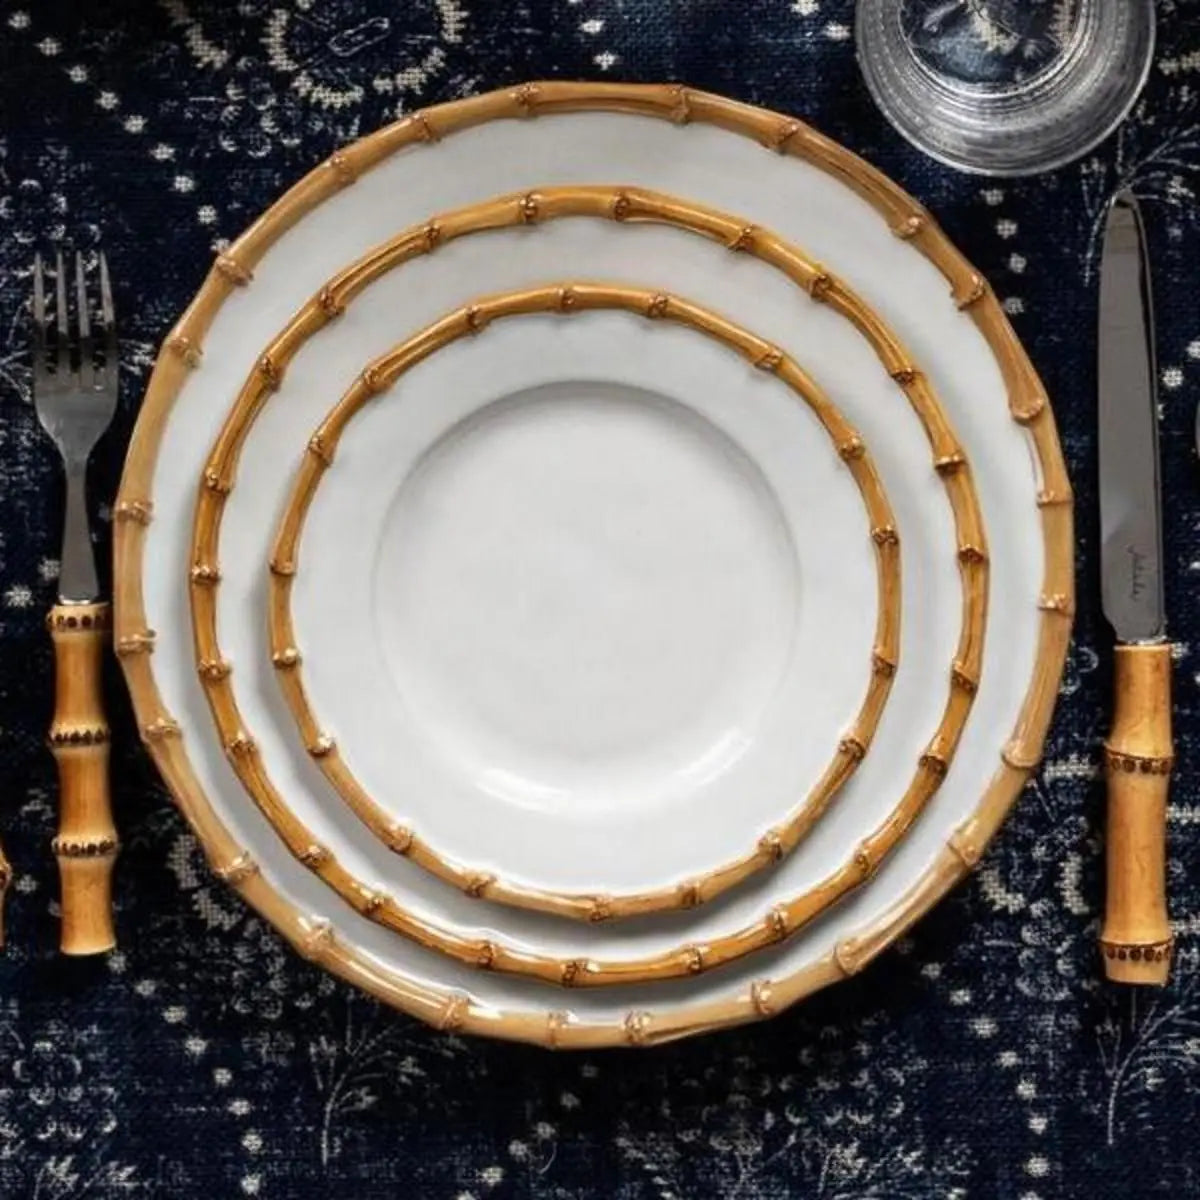 Bamboo Natural Dinner Plate